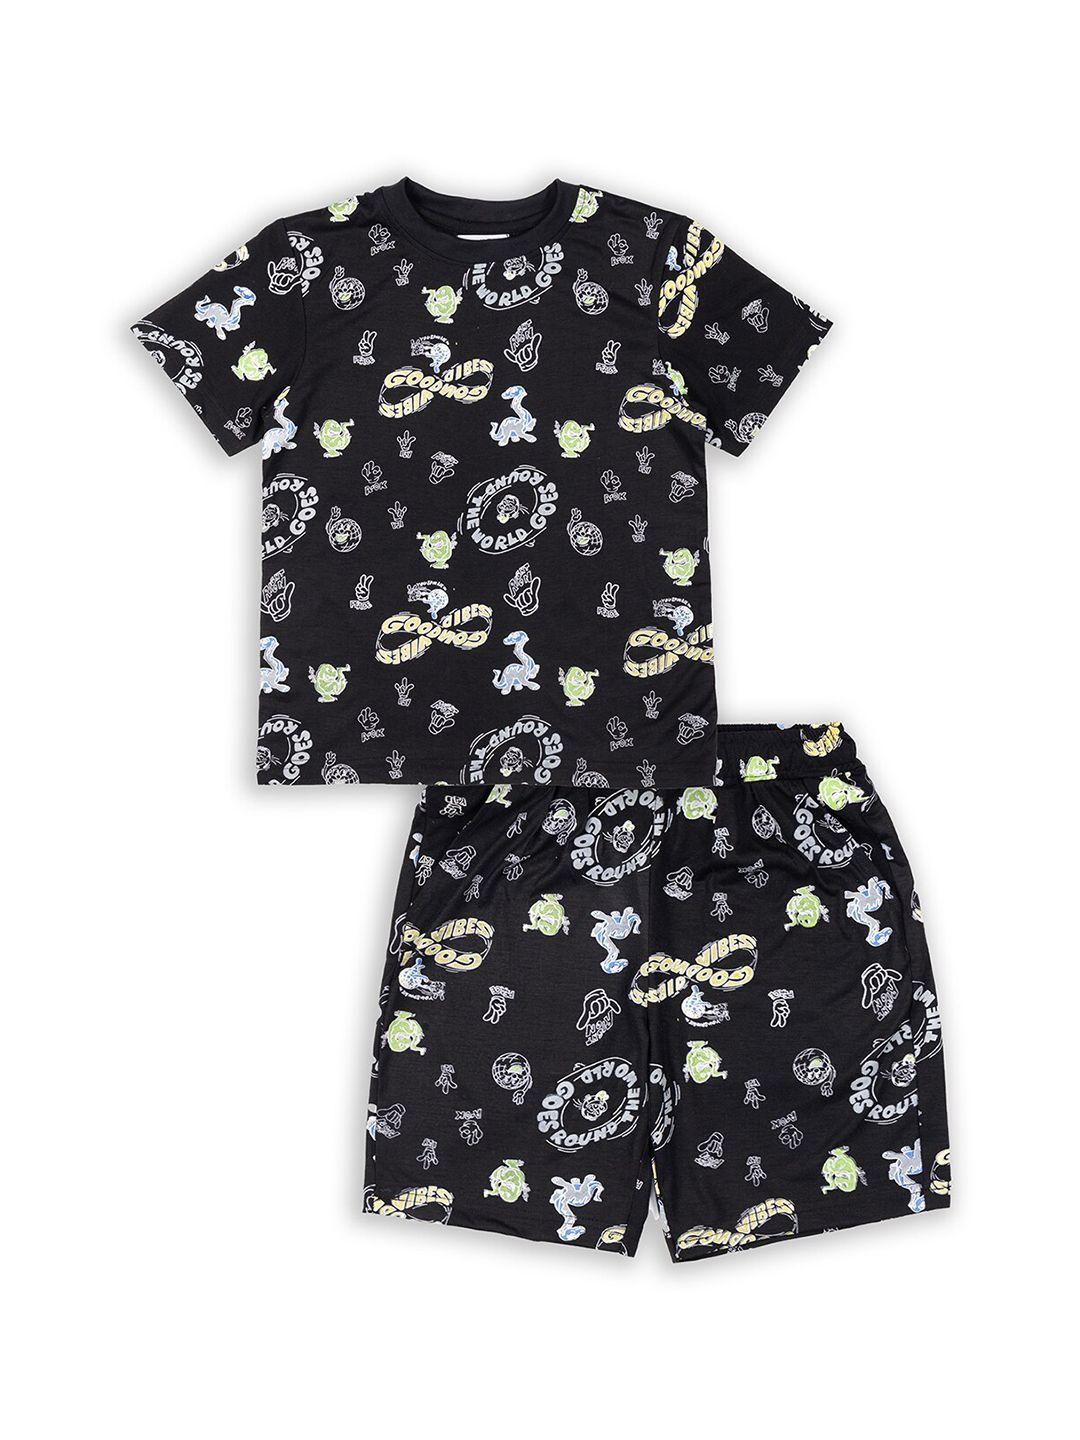 growing-tree-kids-printed-t-shirt-with-shorts